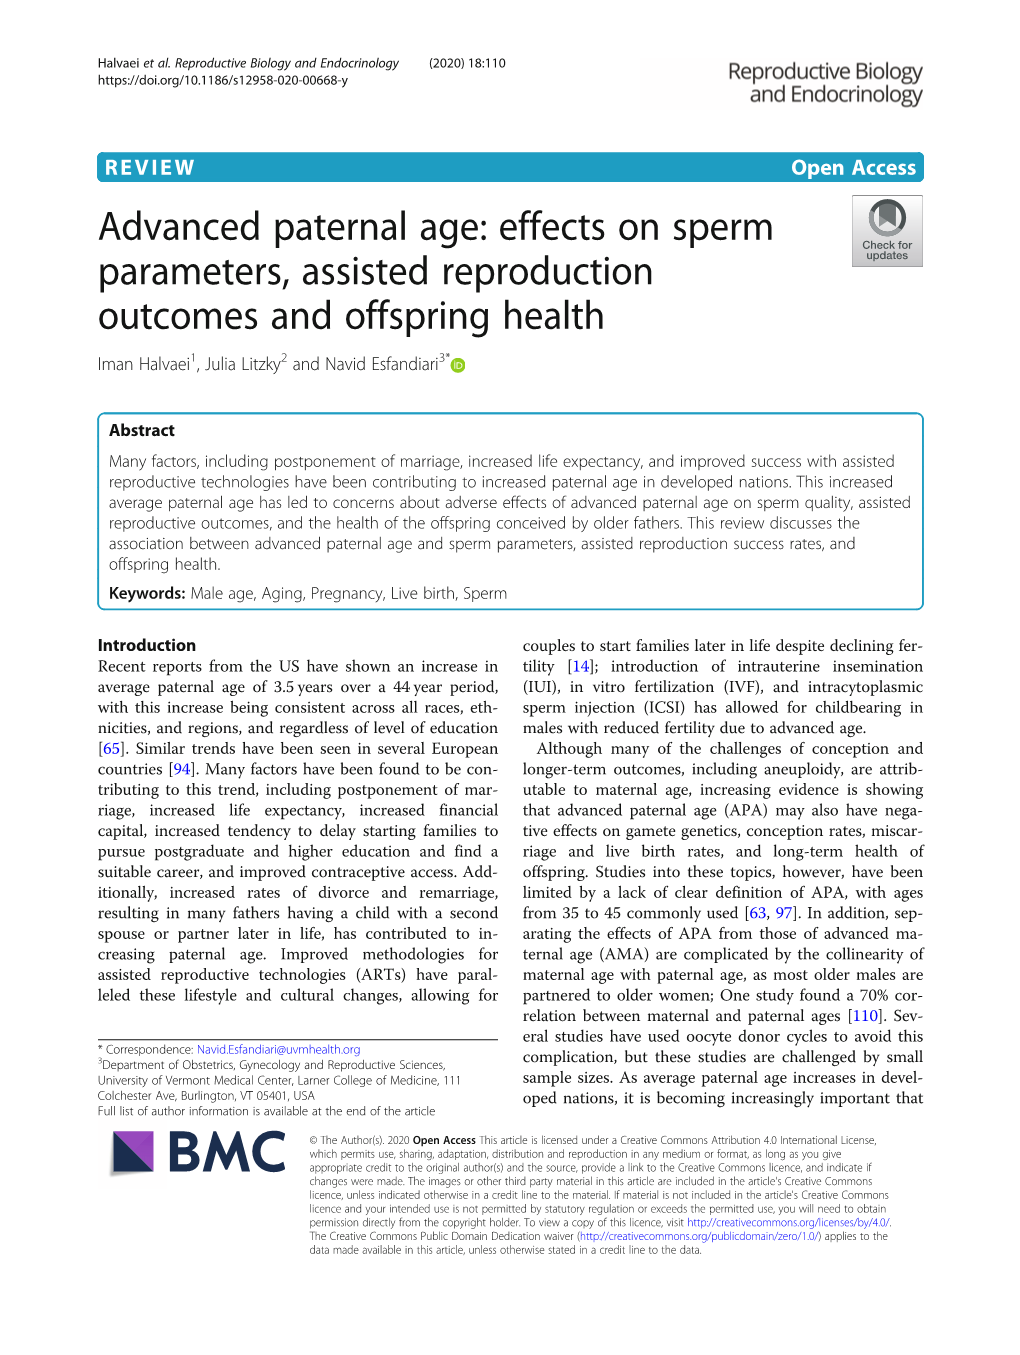 Advanced Paternal Age: Effects on Sperm Parameters, Assisted Reproduction Outcomes and Offspring Health Iman Halvaei1, Julia Litzky2 and Navid Esfandiari3*